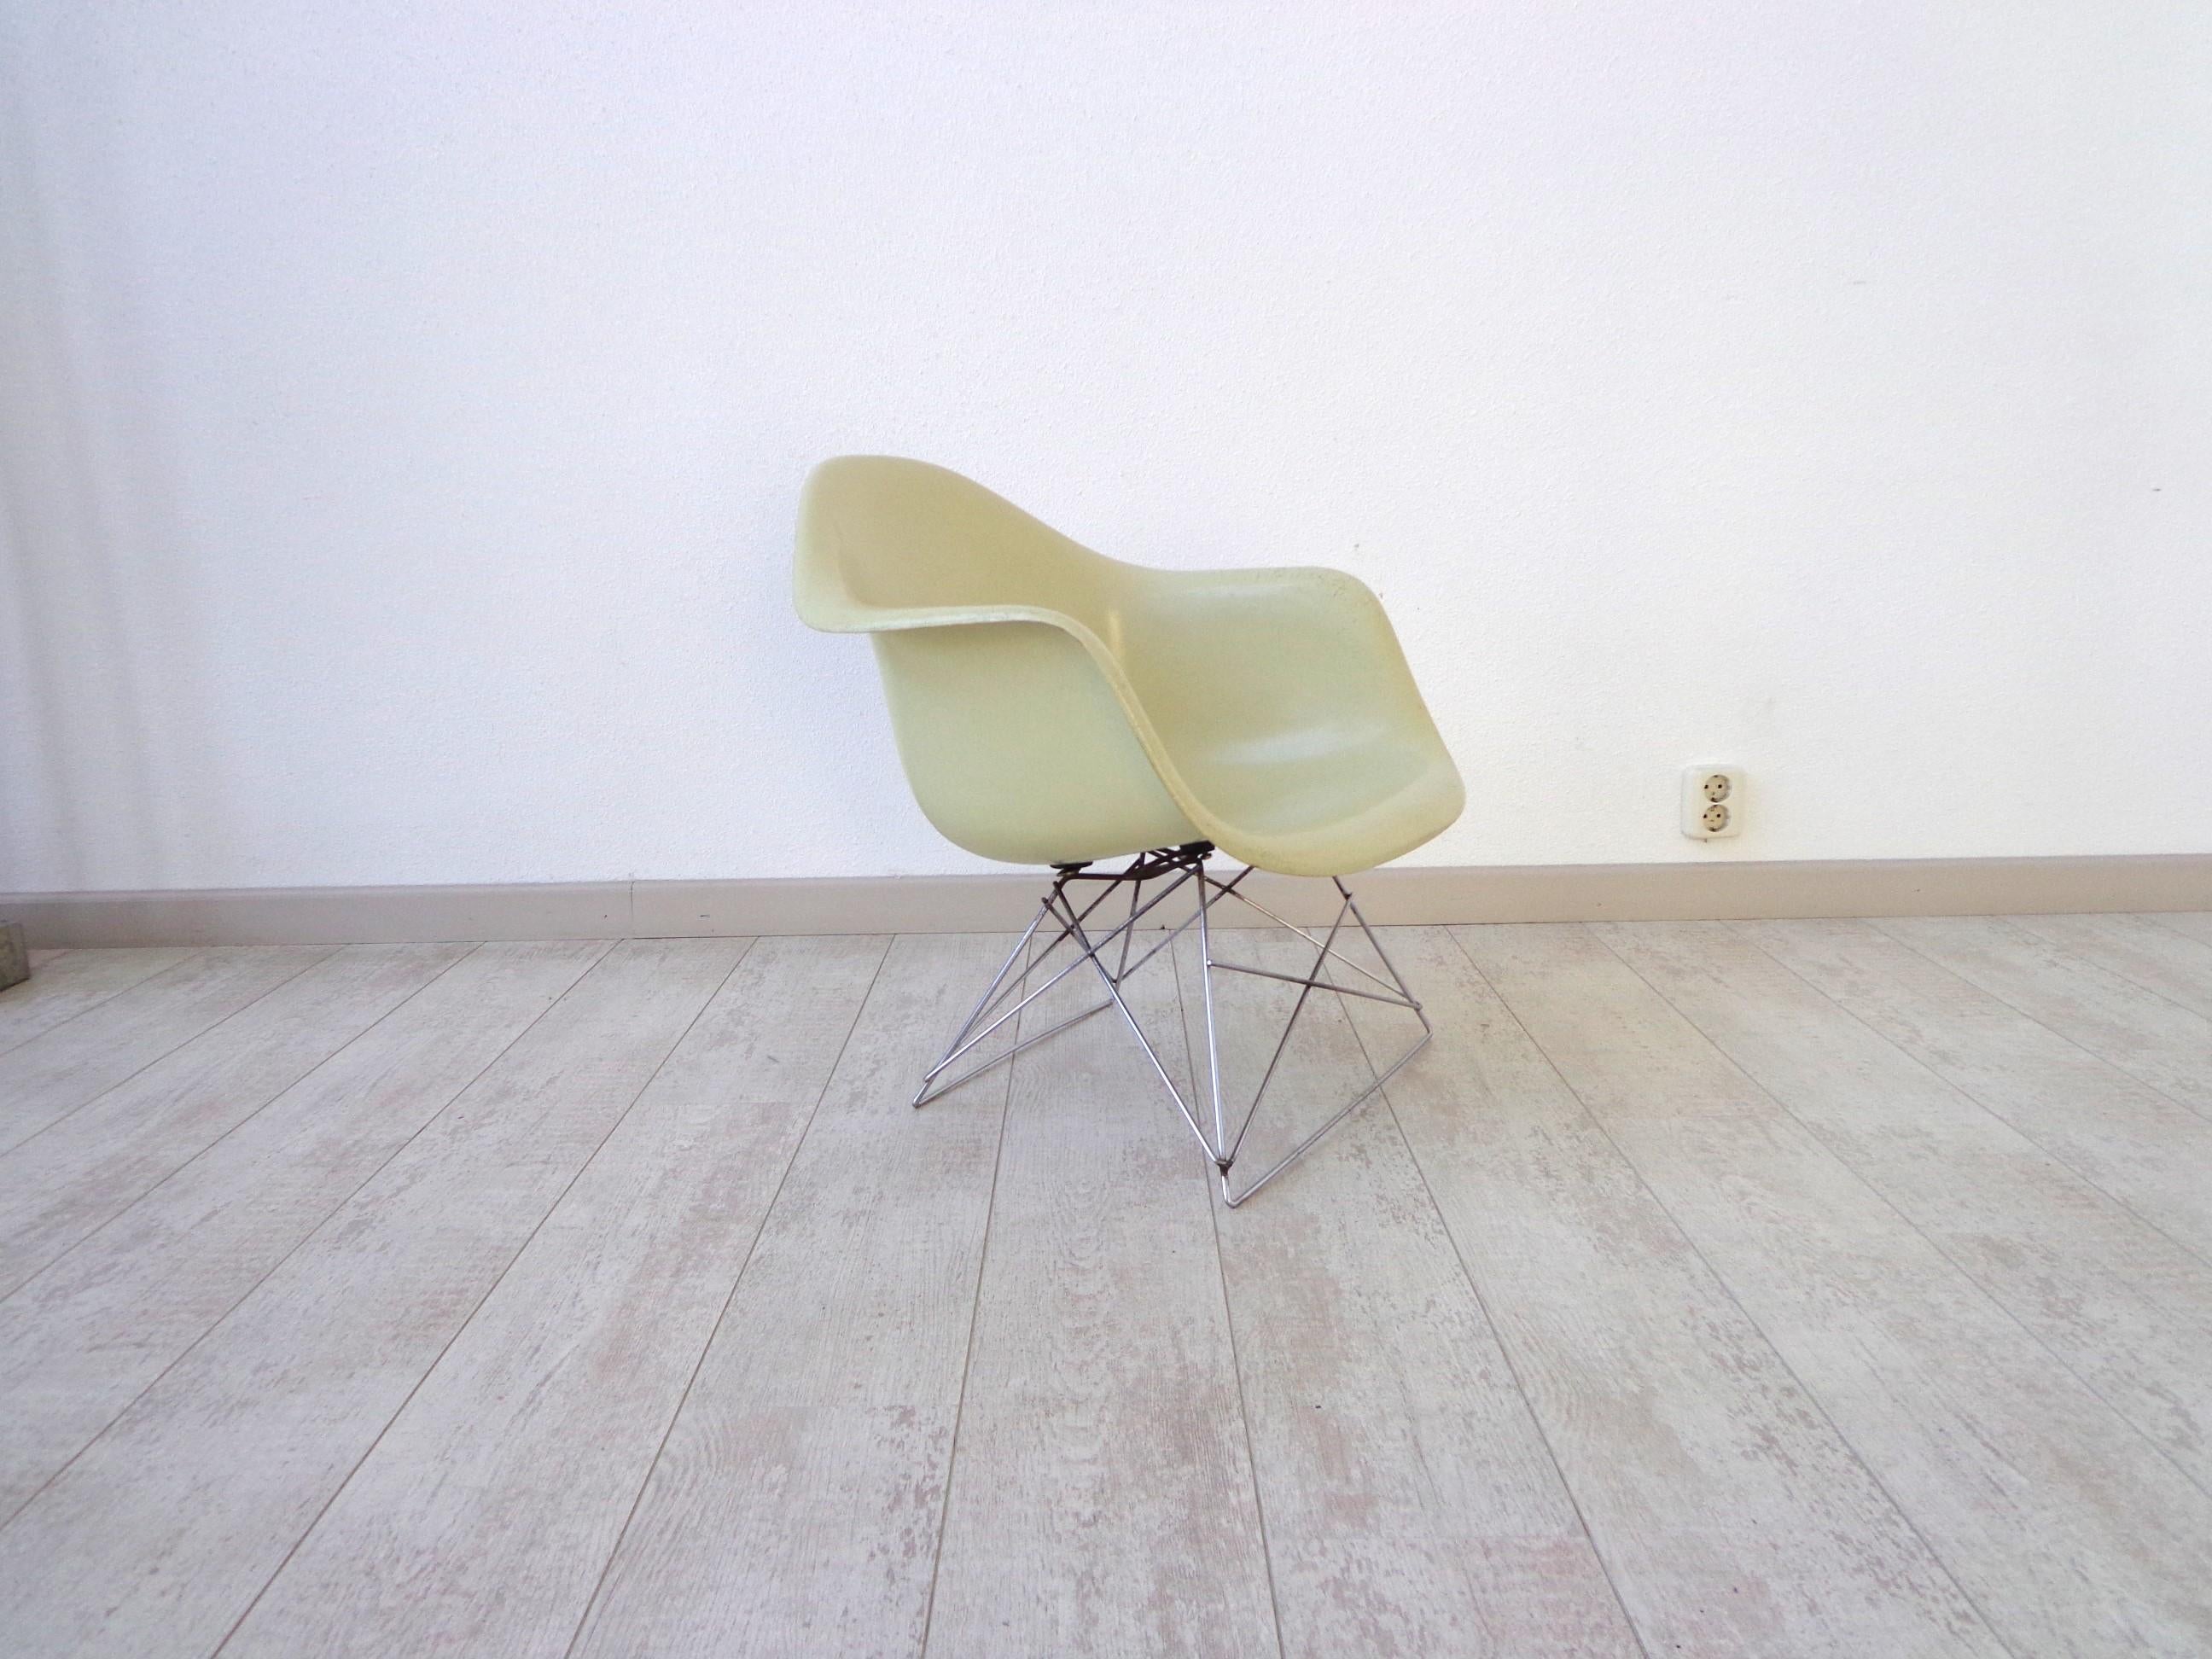 Charles and Ray Eames Low Armchair Rod (LAR) for Herman Miller.
Molded off-white fiberglass, chrome-plated steel, rubber.
Signed with manufacturer’s mark underside.
Pair available.

The LAR seems to have been one of Charles and Ray's favourite